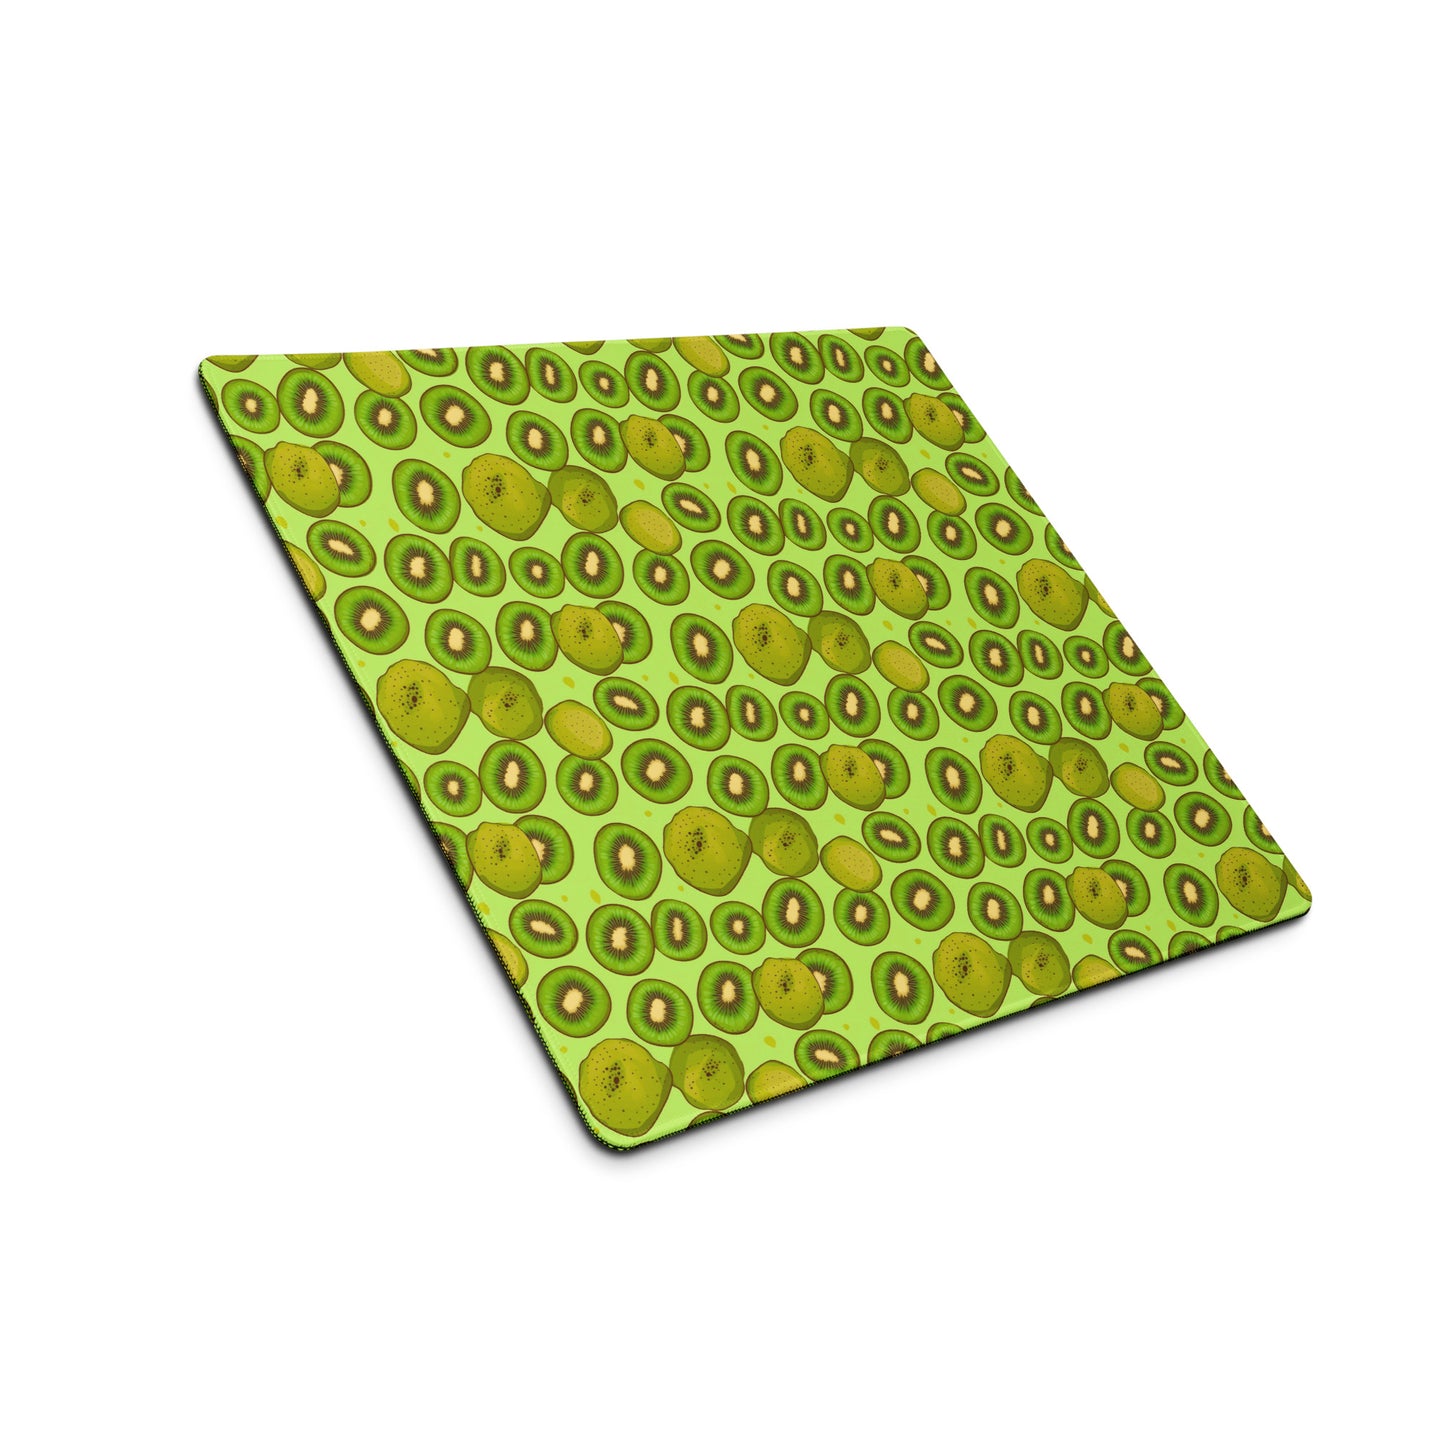 A 18" x 16" desk pad with Kiwis all over it shown at an angle. Green in color.